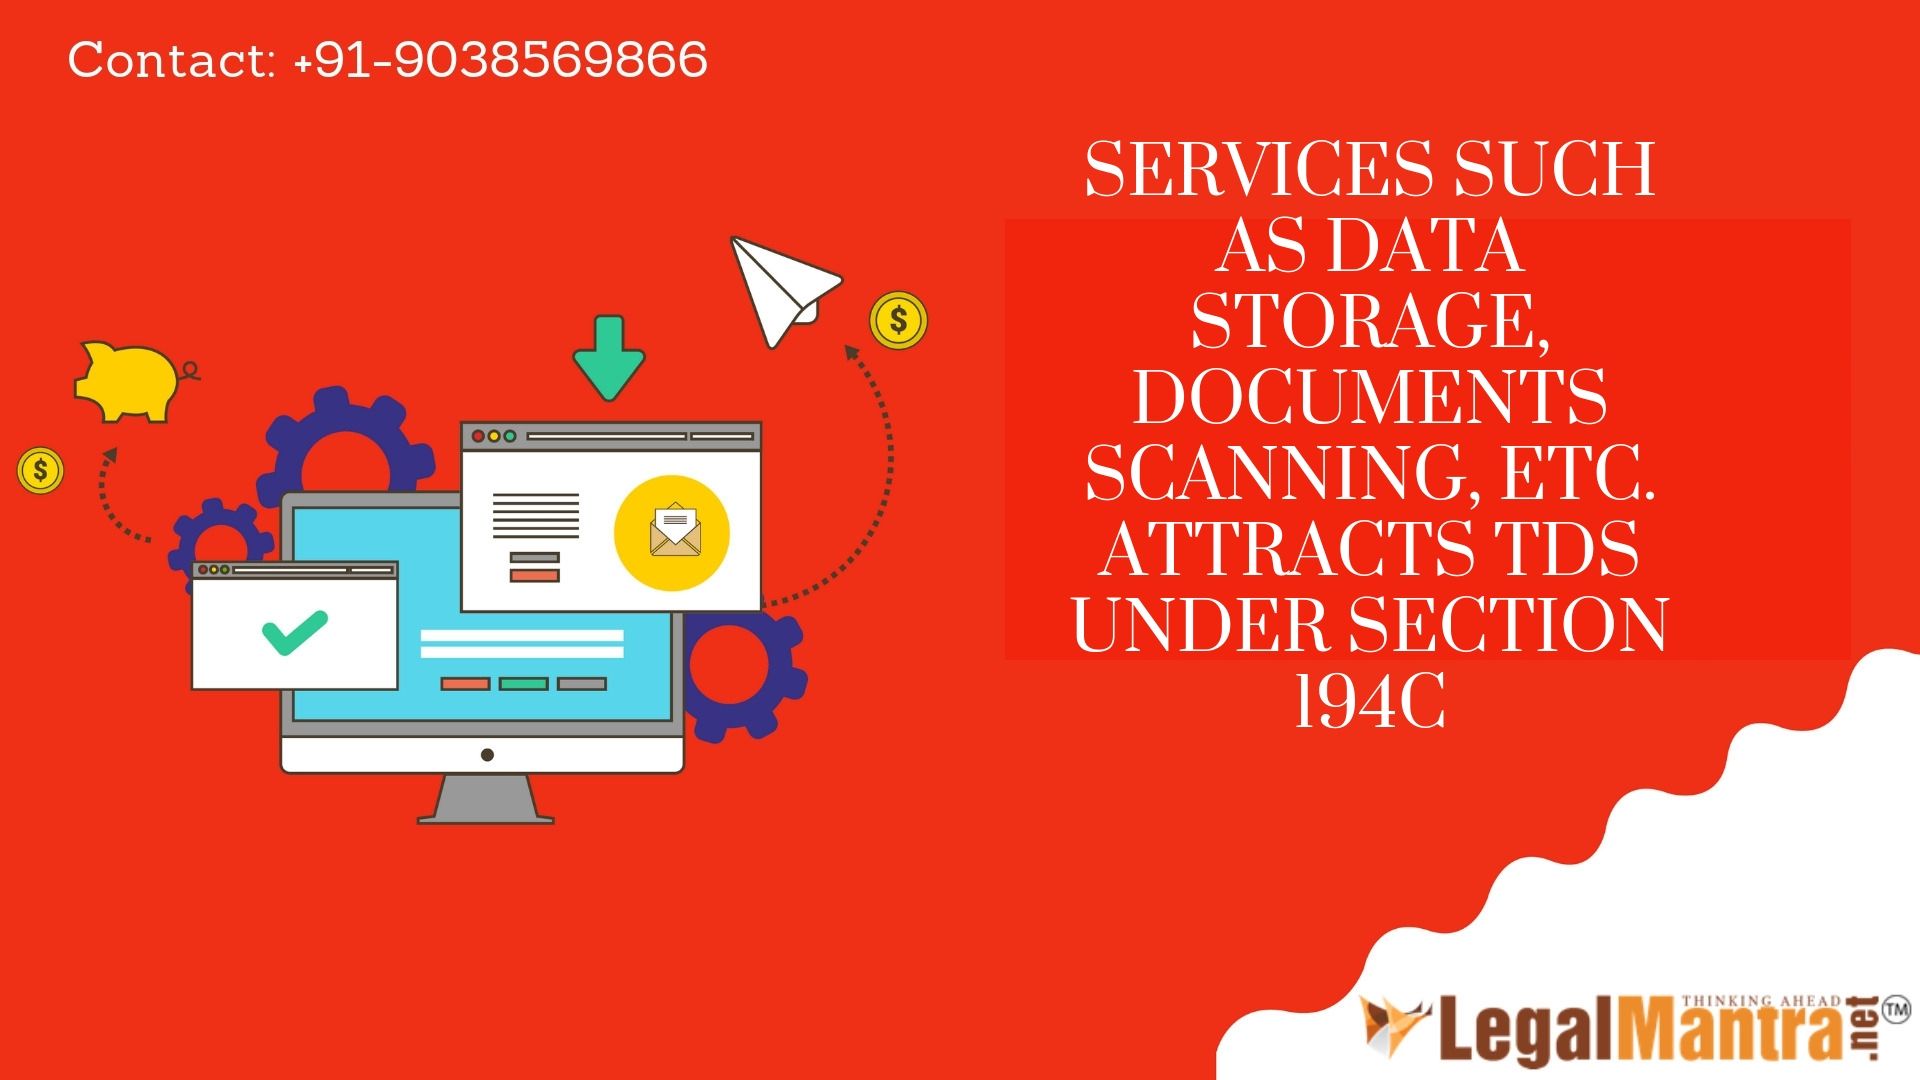 Services Such as Data Storage, Documents Scanning, etc. Attracts TDS under Section 194C